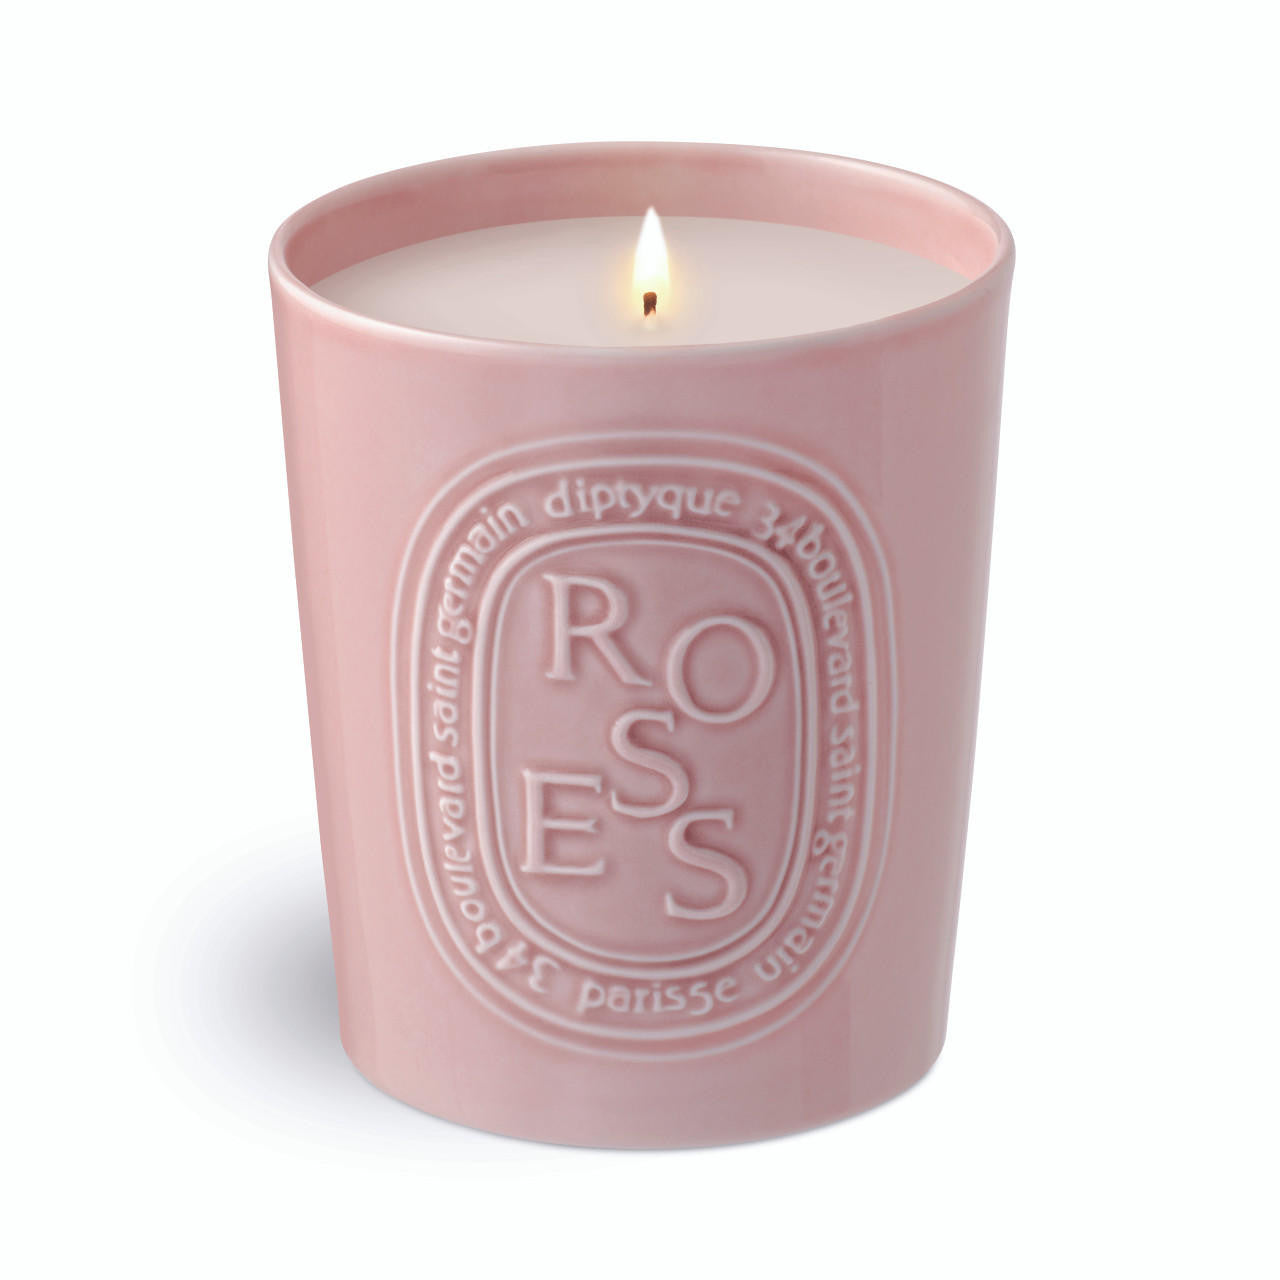  Diptyque Roses 3 Wick Candle 600g 